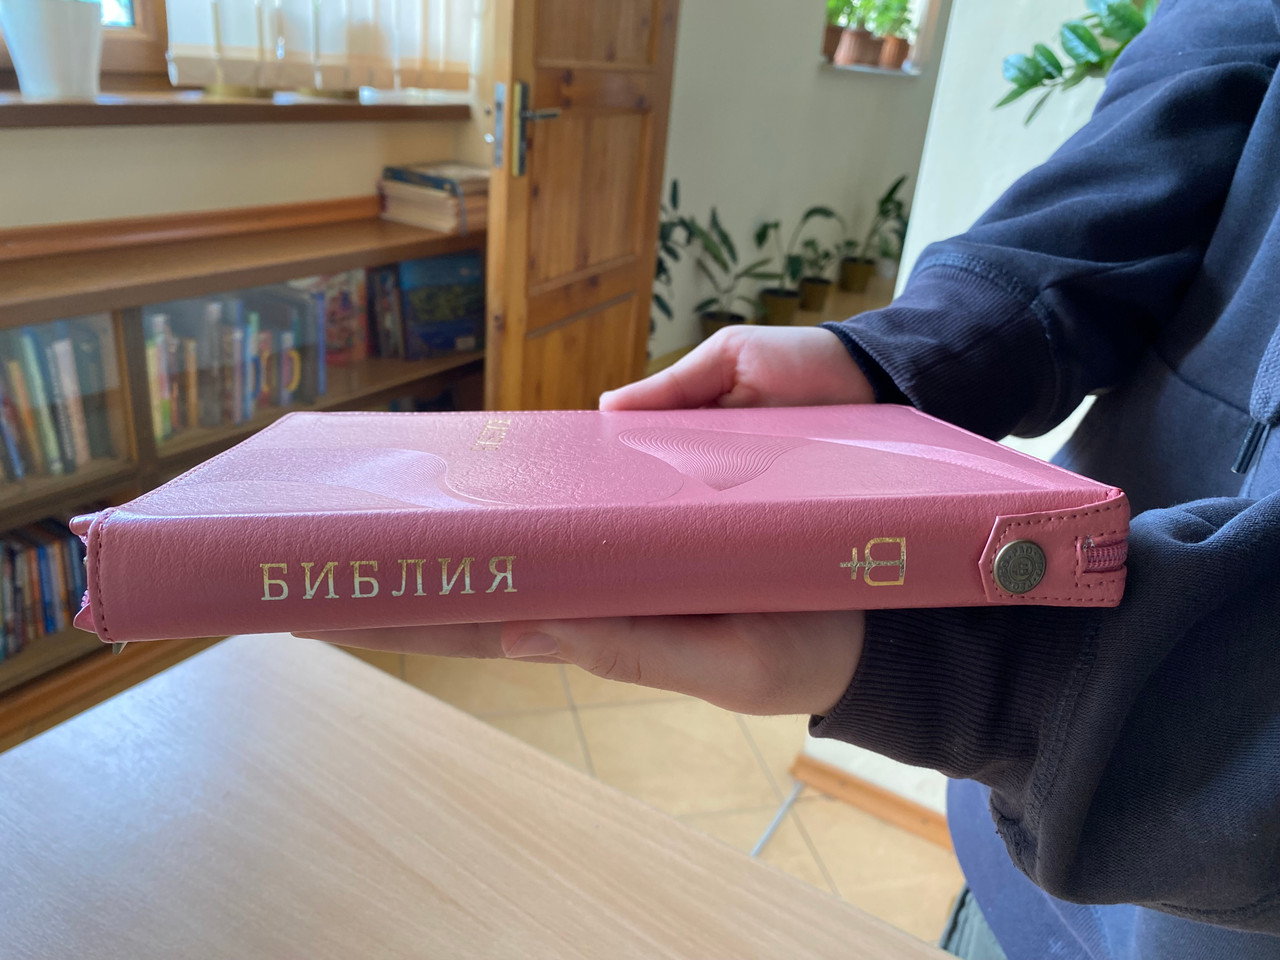 https://cdn10.bigcommerce.com/s-62bdpkt7pb/products/0/images/268976/Pink_Russian_Bible_with_family_pages_gift_wedding_children_events_Pink_Leather_bound_with_zippe_indexes_buttonr_and_golden_edges_Mid_Size_20__60155.1678101832.1280.1280.JPG?c=2&_gl=1*1wx24yl*_ga*MjA2NTIxMjE2MC4xNTkwNTEyNTMy*_ga_WS2VZYPC6G*MTY3ODA5OTkwMy43OTEuMS4xNjc4MTAxNTIyLjYwLjAuMA..